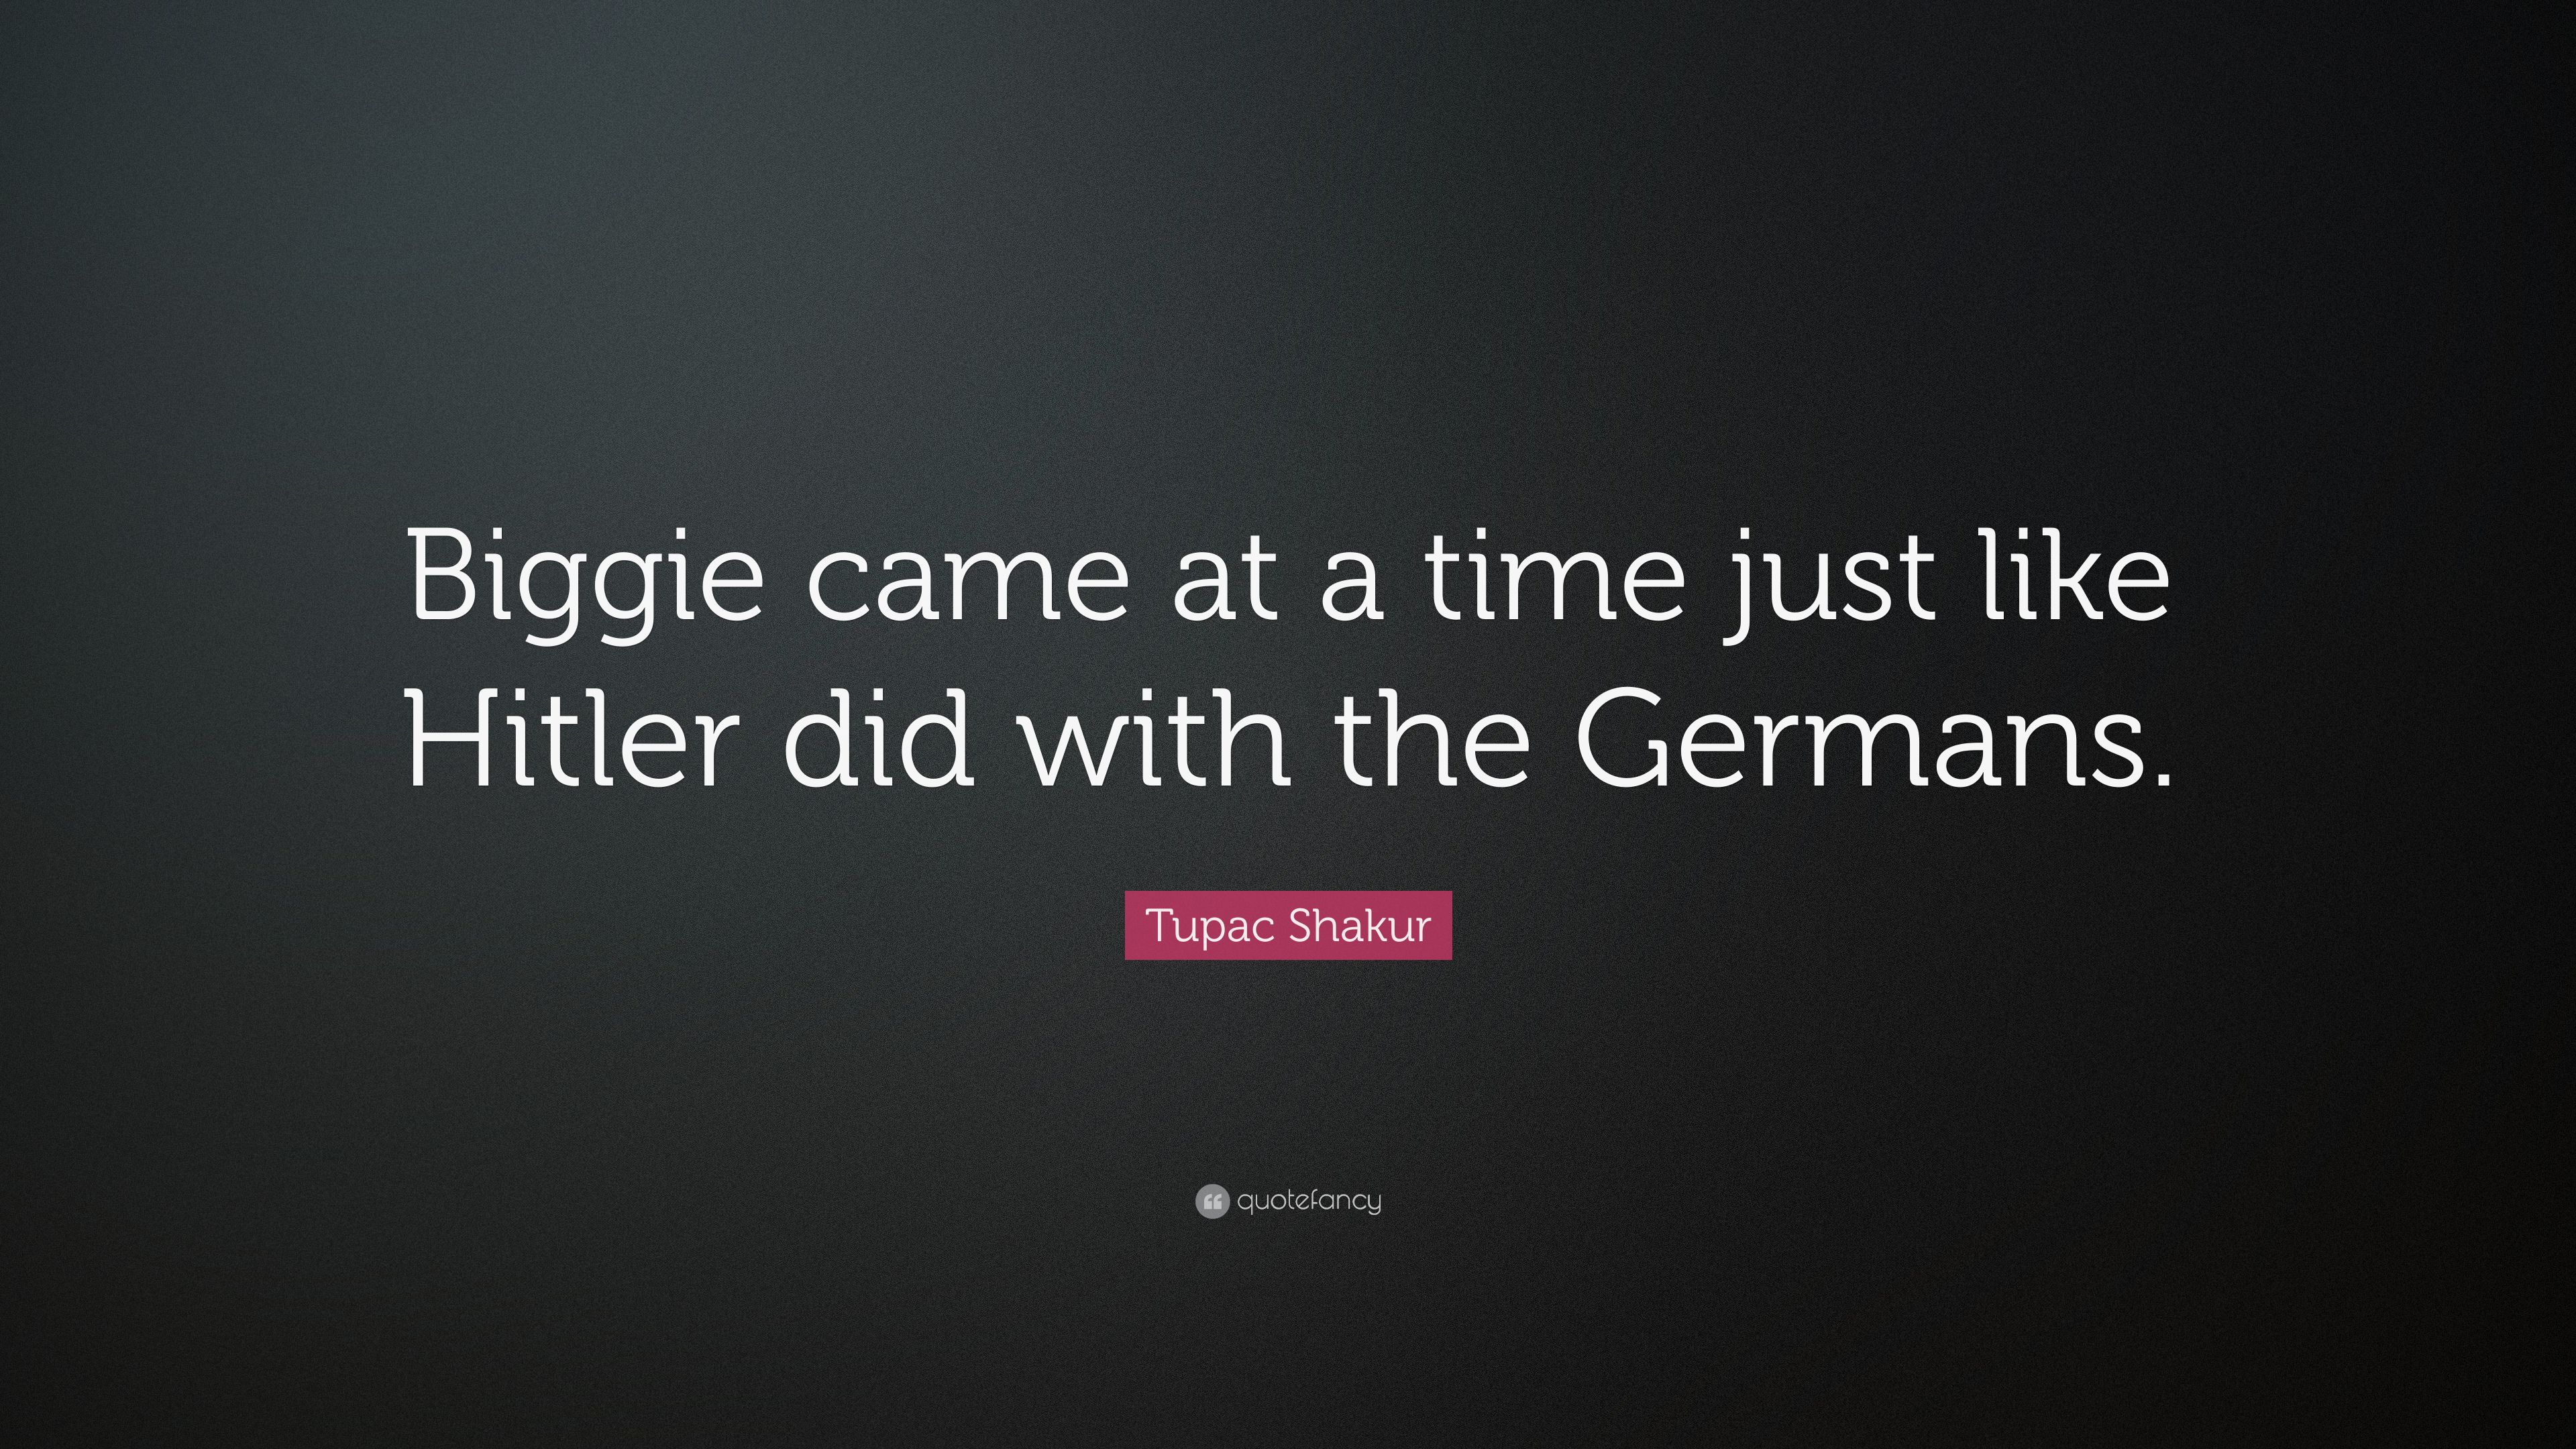 Tupac Shakur Quote: “Biggie came at a time just like Hitler did